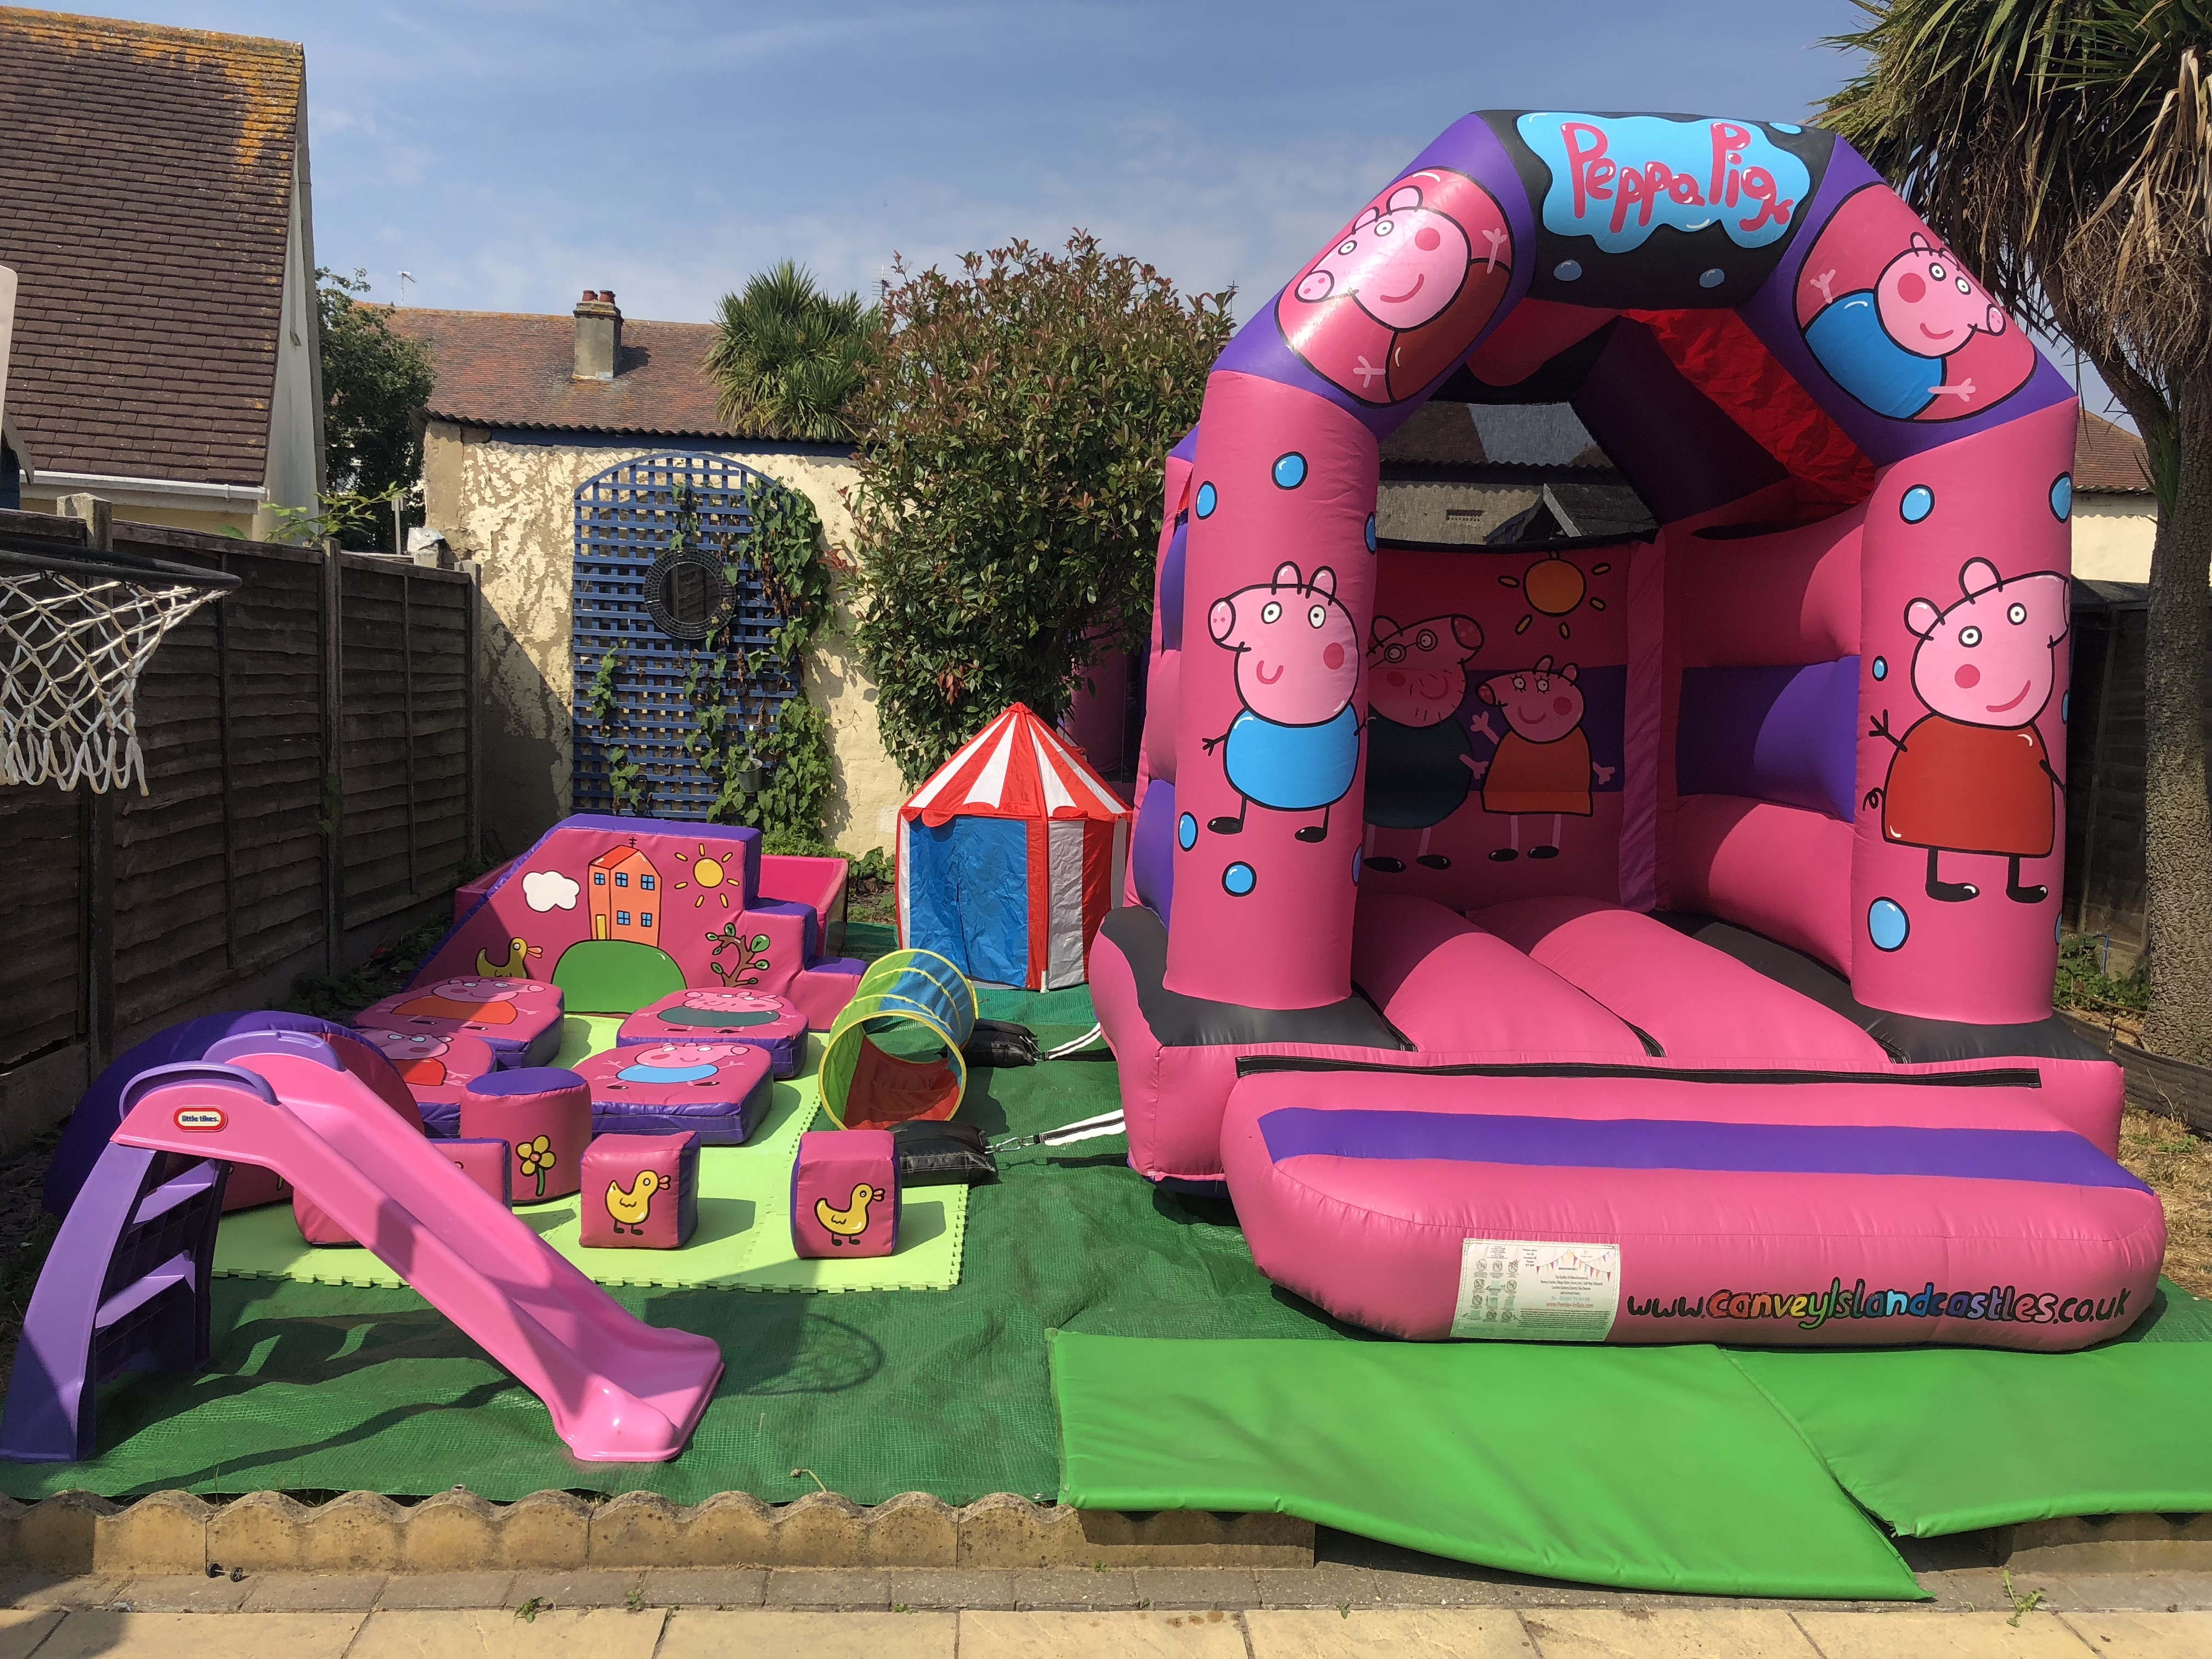 Bouncy castle hire in Essex